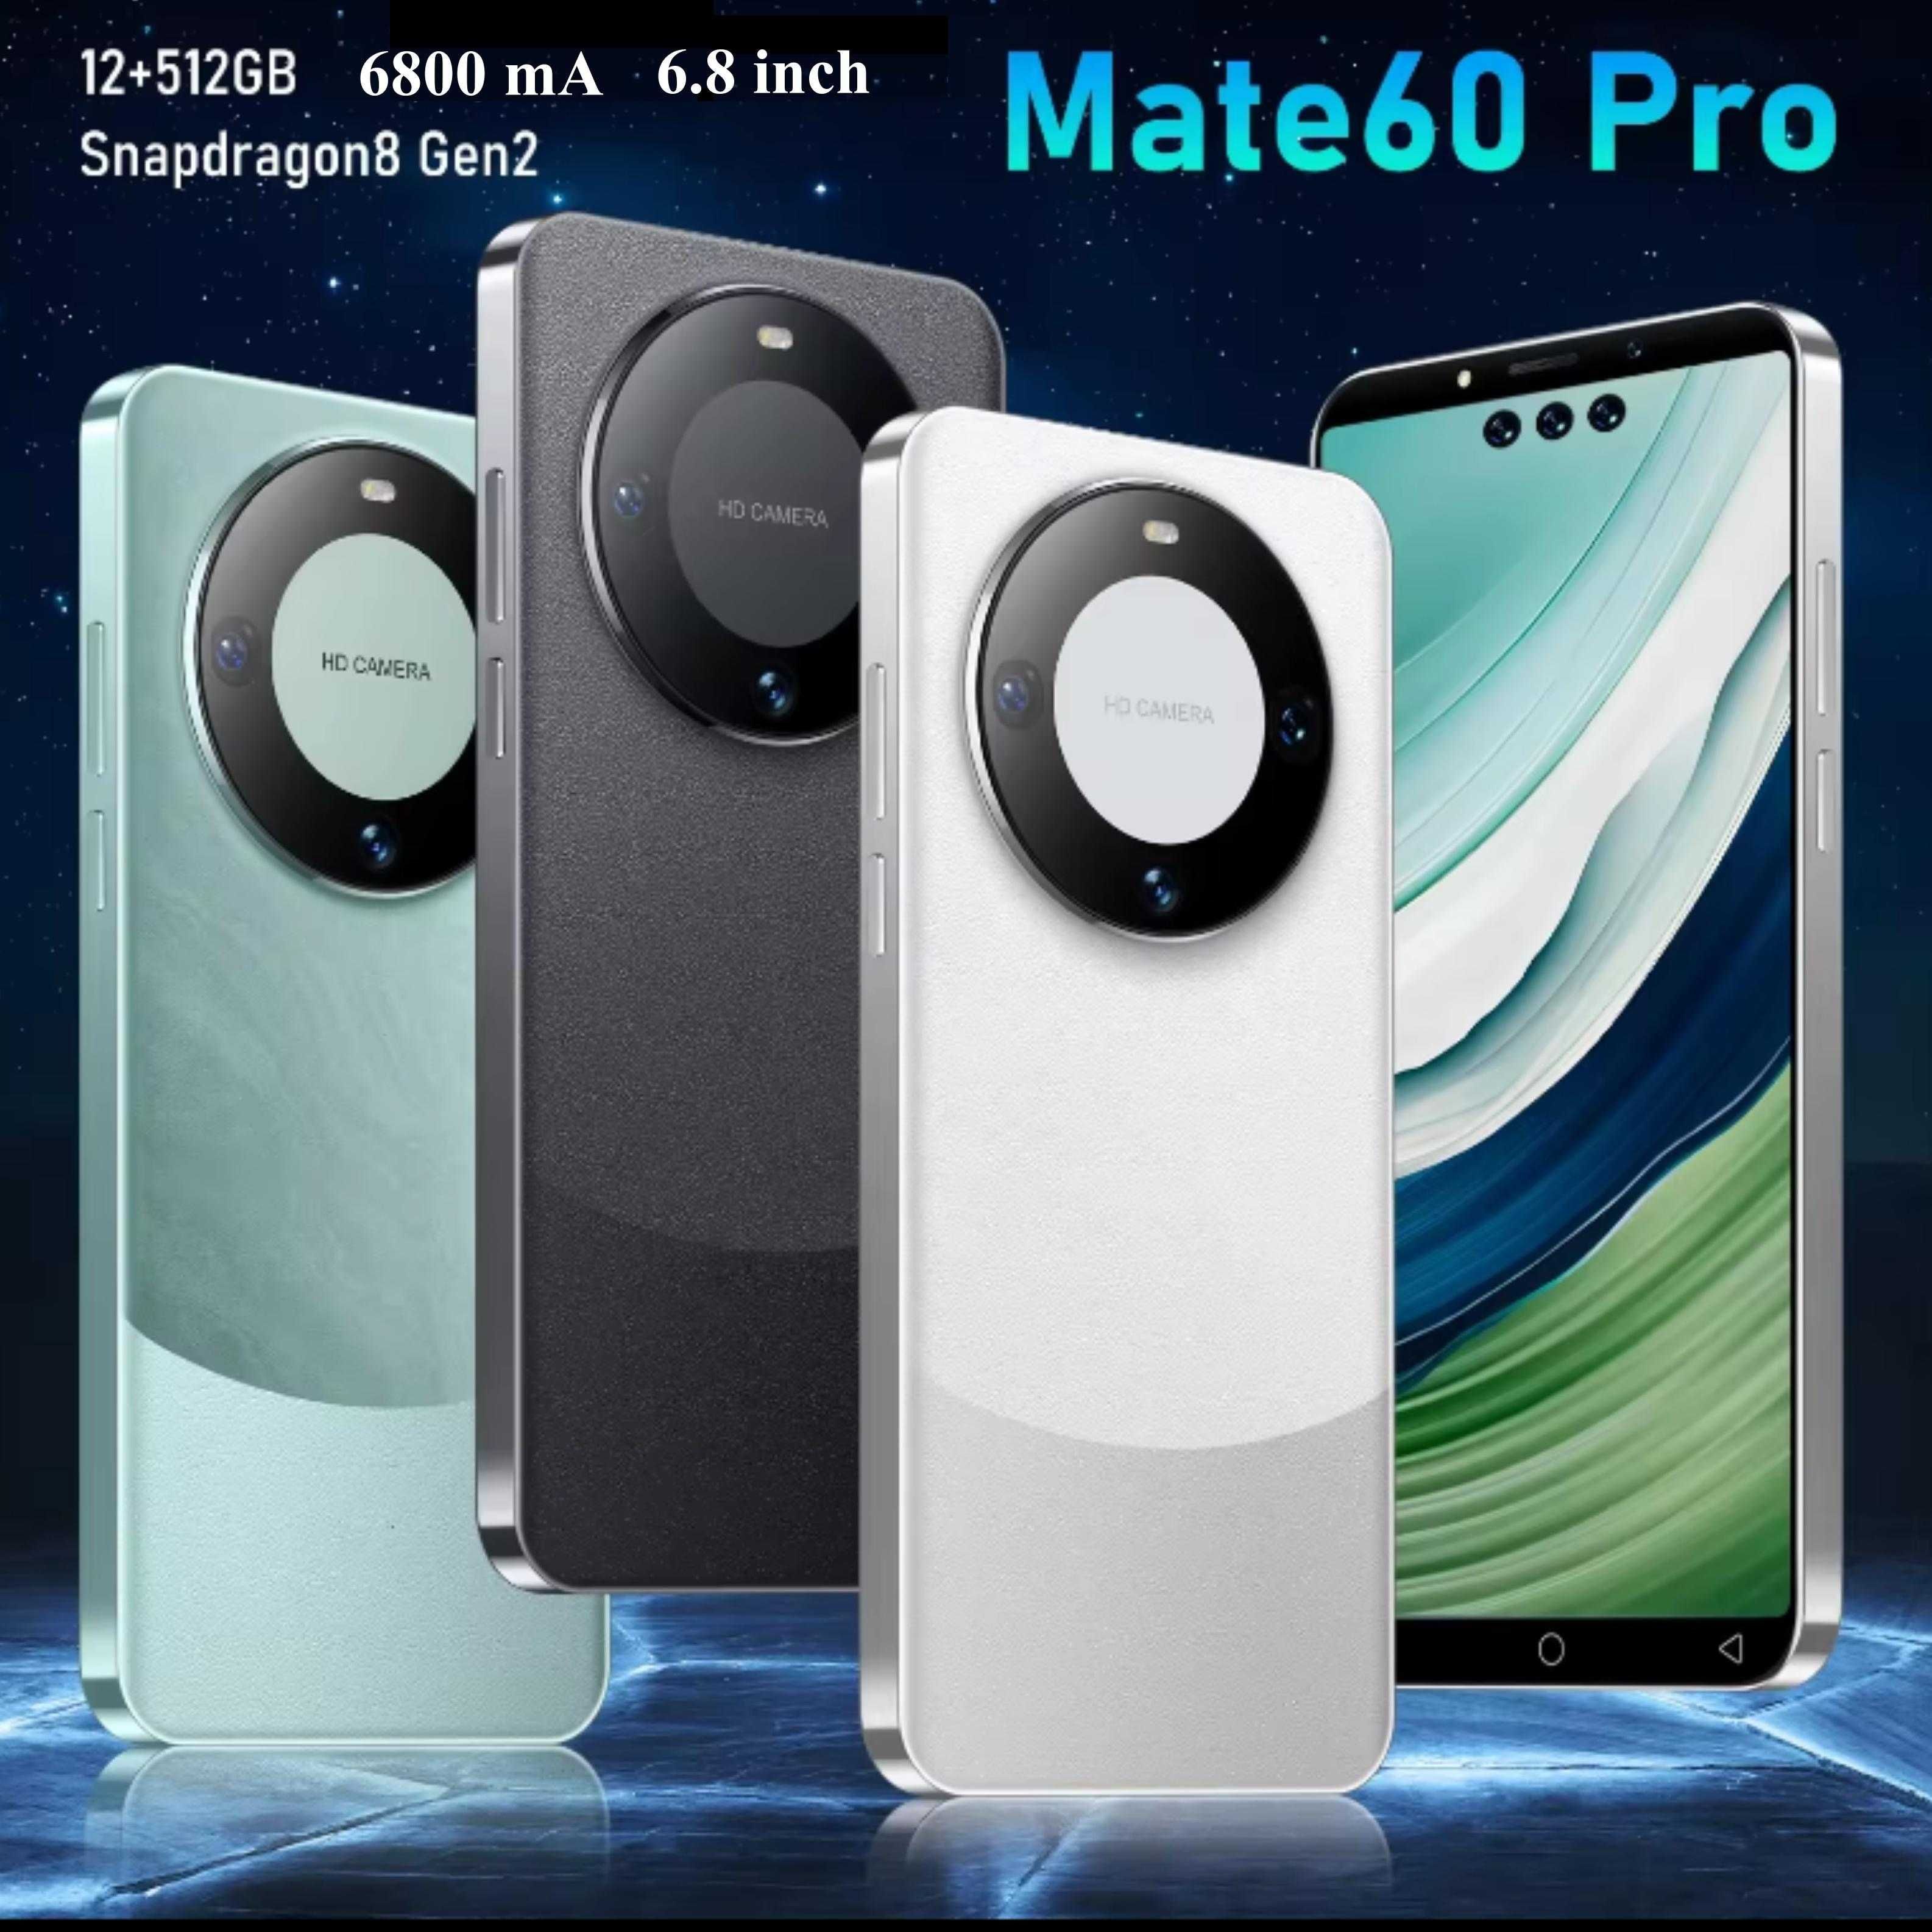 Mate60 Pro
6.8 inch, Android 13, 12GB+512GB, 48MP+108MP, 6800 mA, 5G